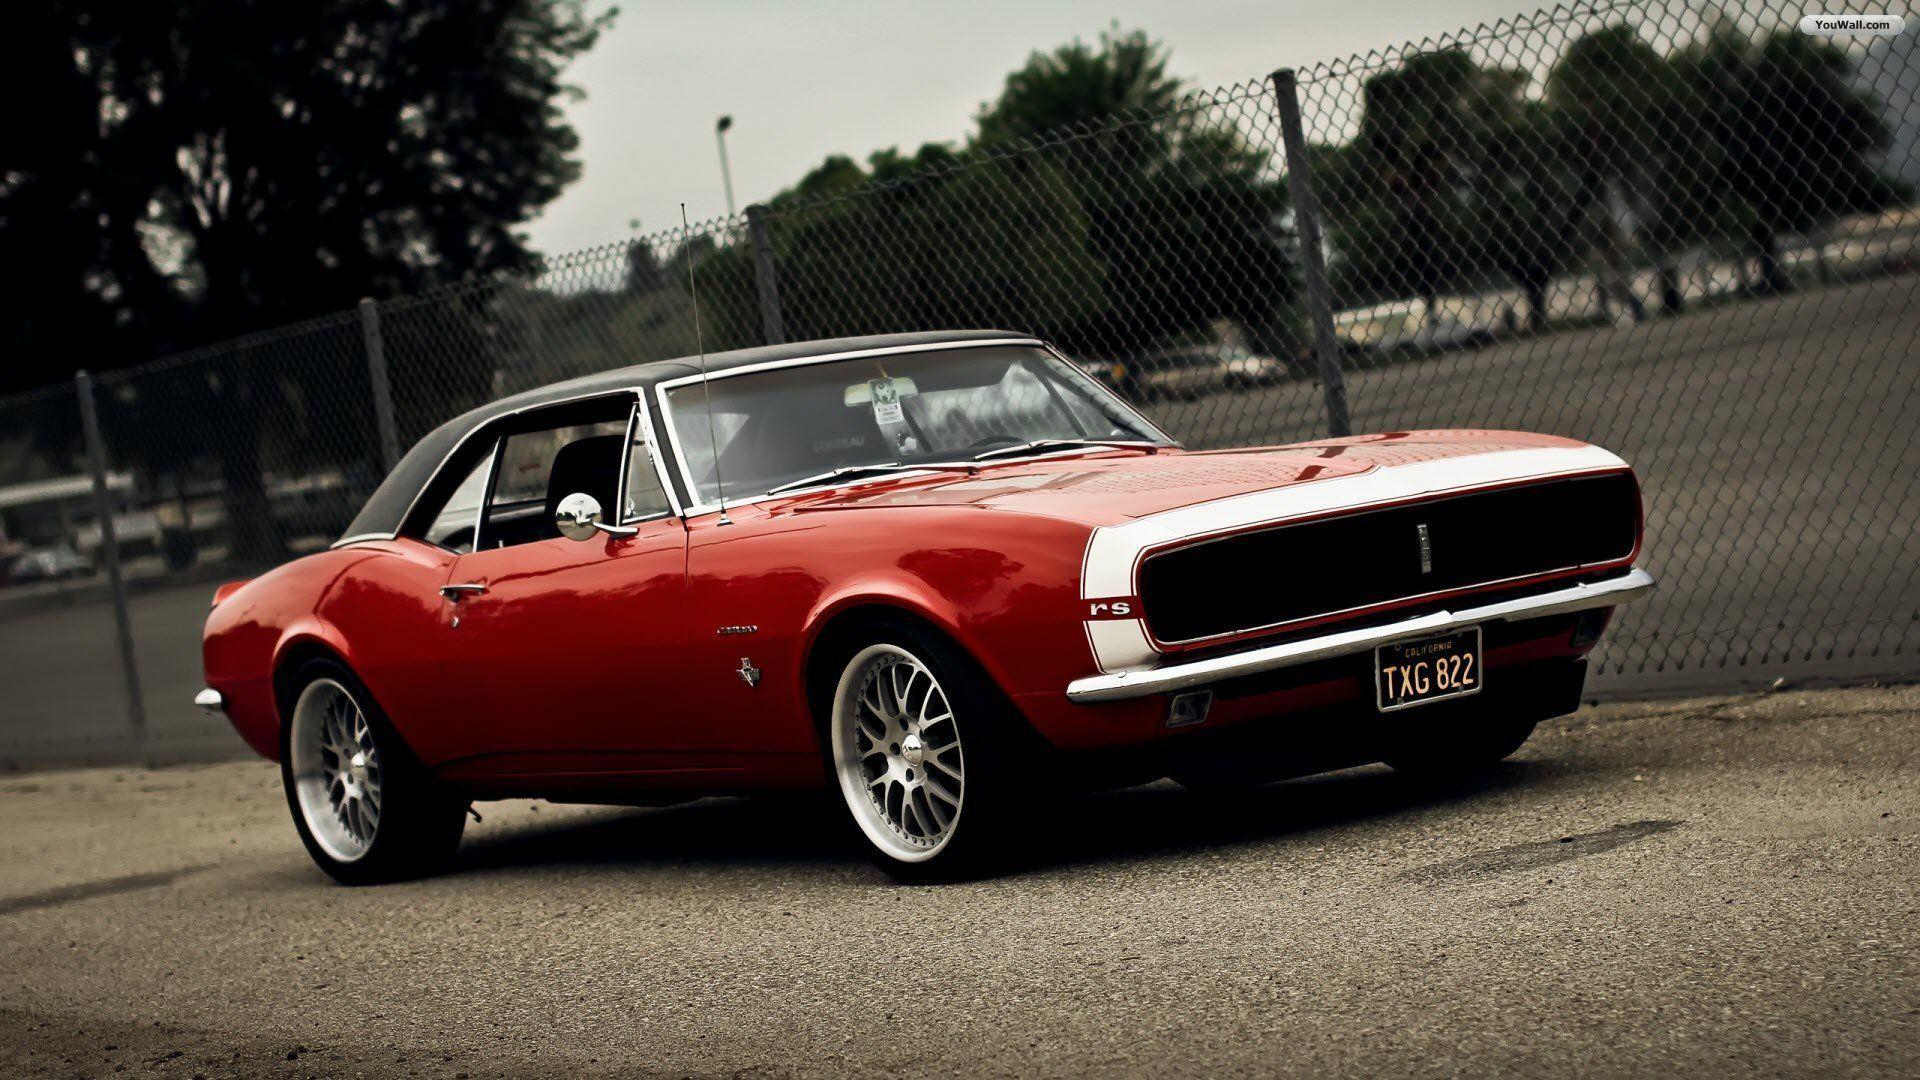 Hd Muscle Car Wallpapers For Mobile